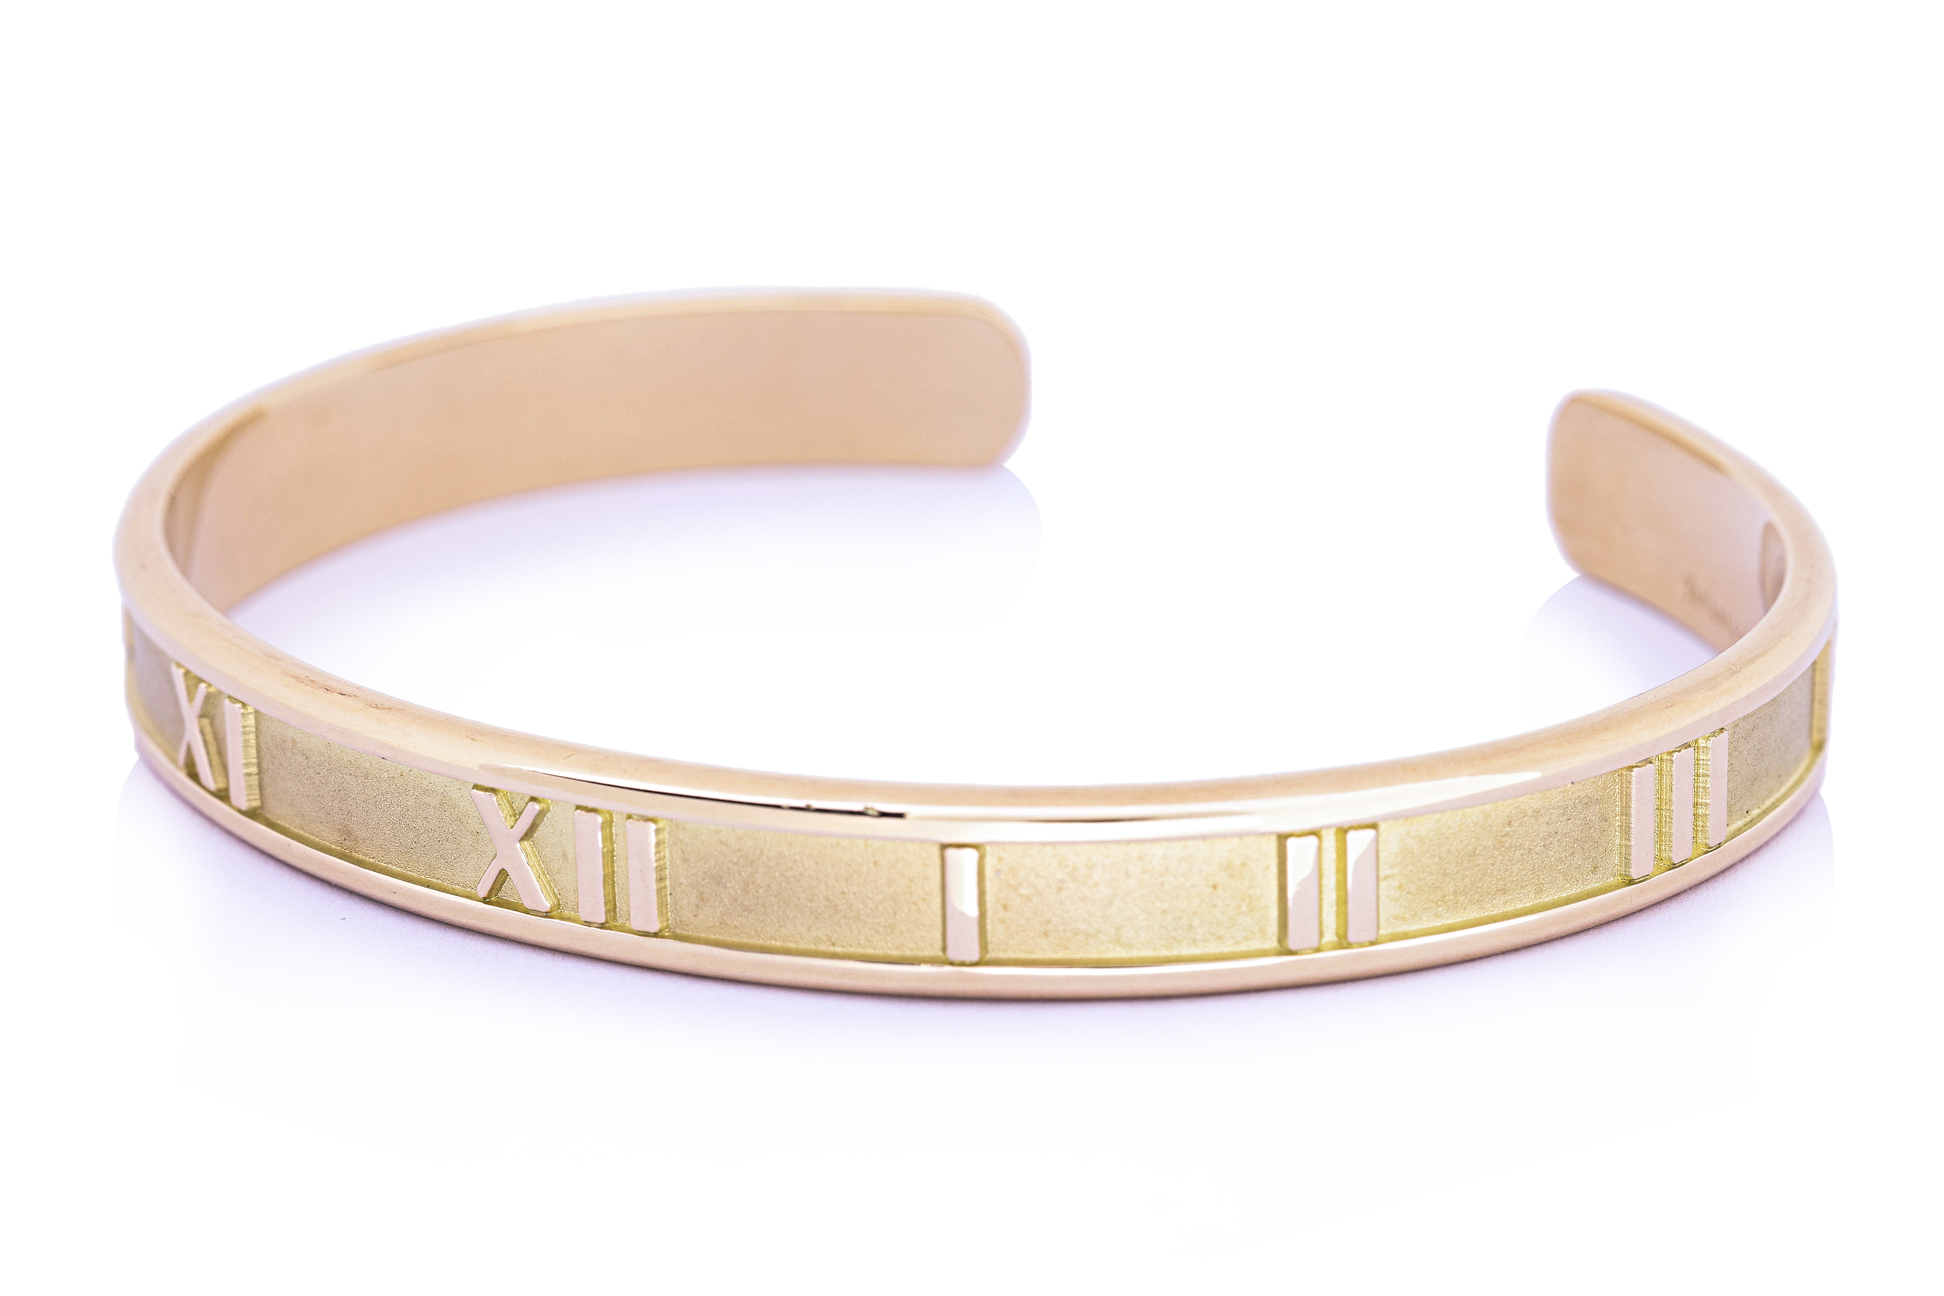 AN 'ATLAS' CUFF BANGLE BY TIFFANY & CO. - Image 3 of 6